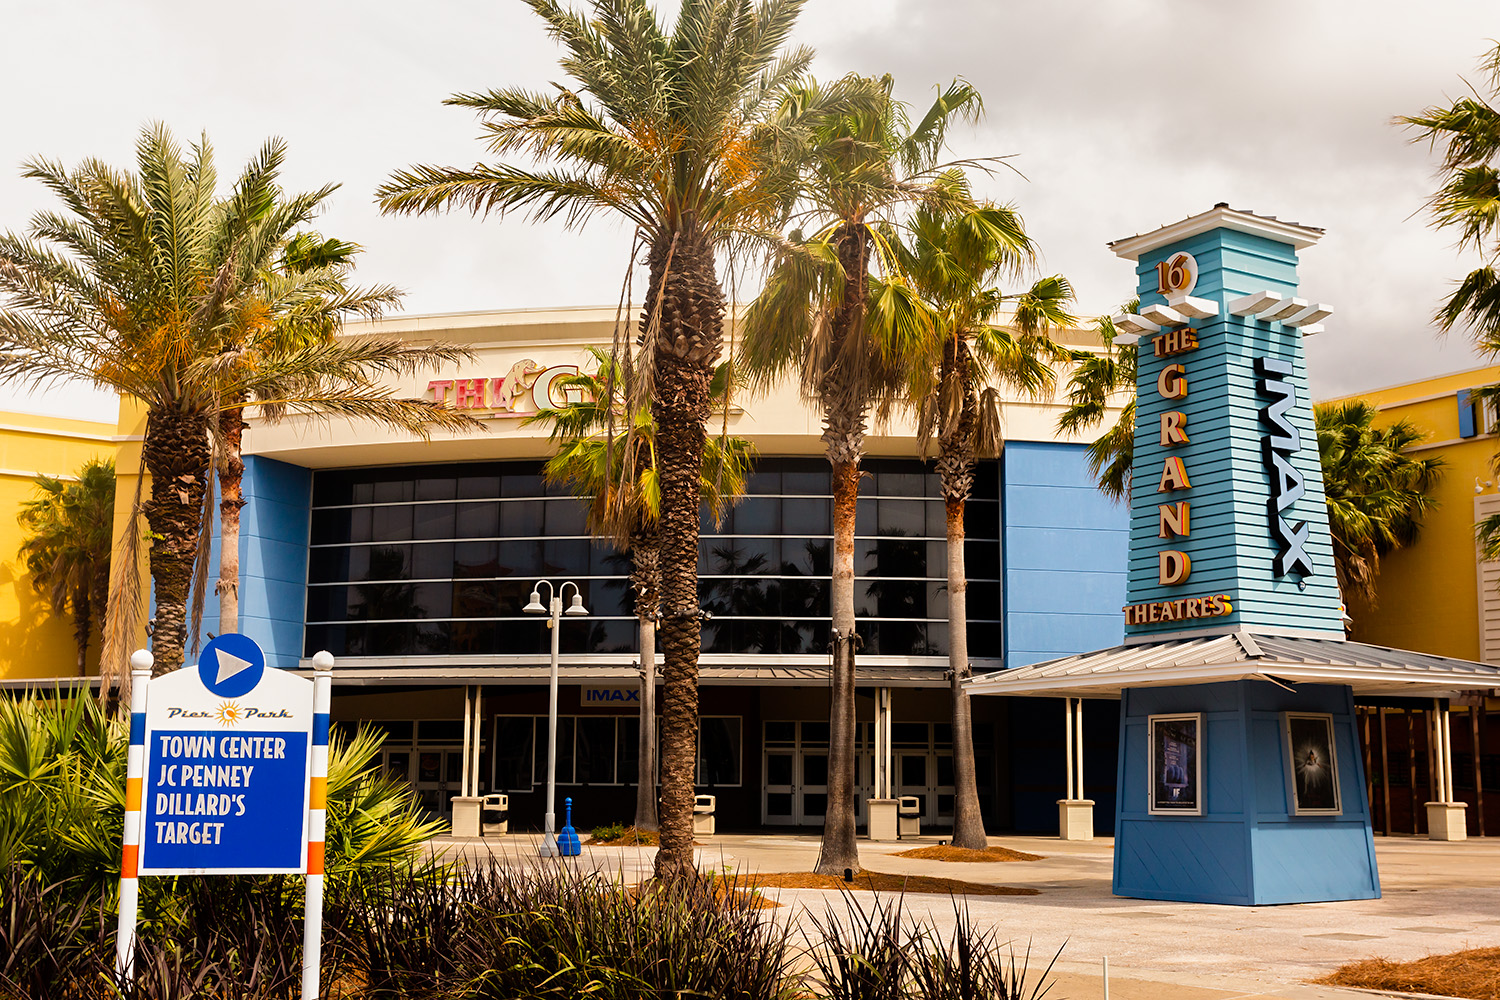 panama city beach the grand theaters in pier park